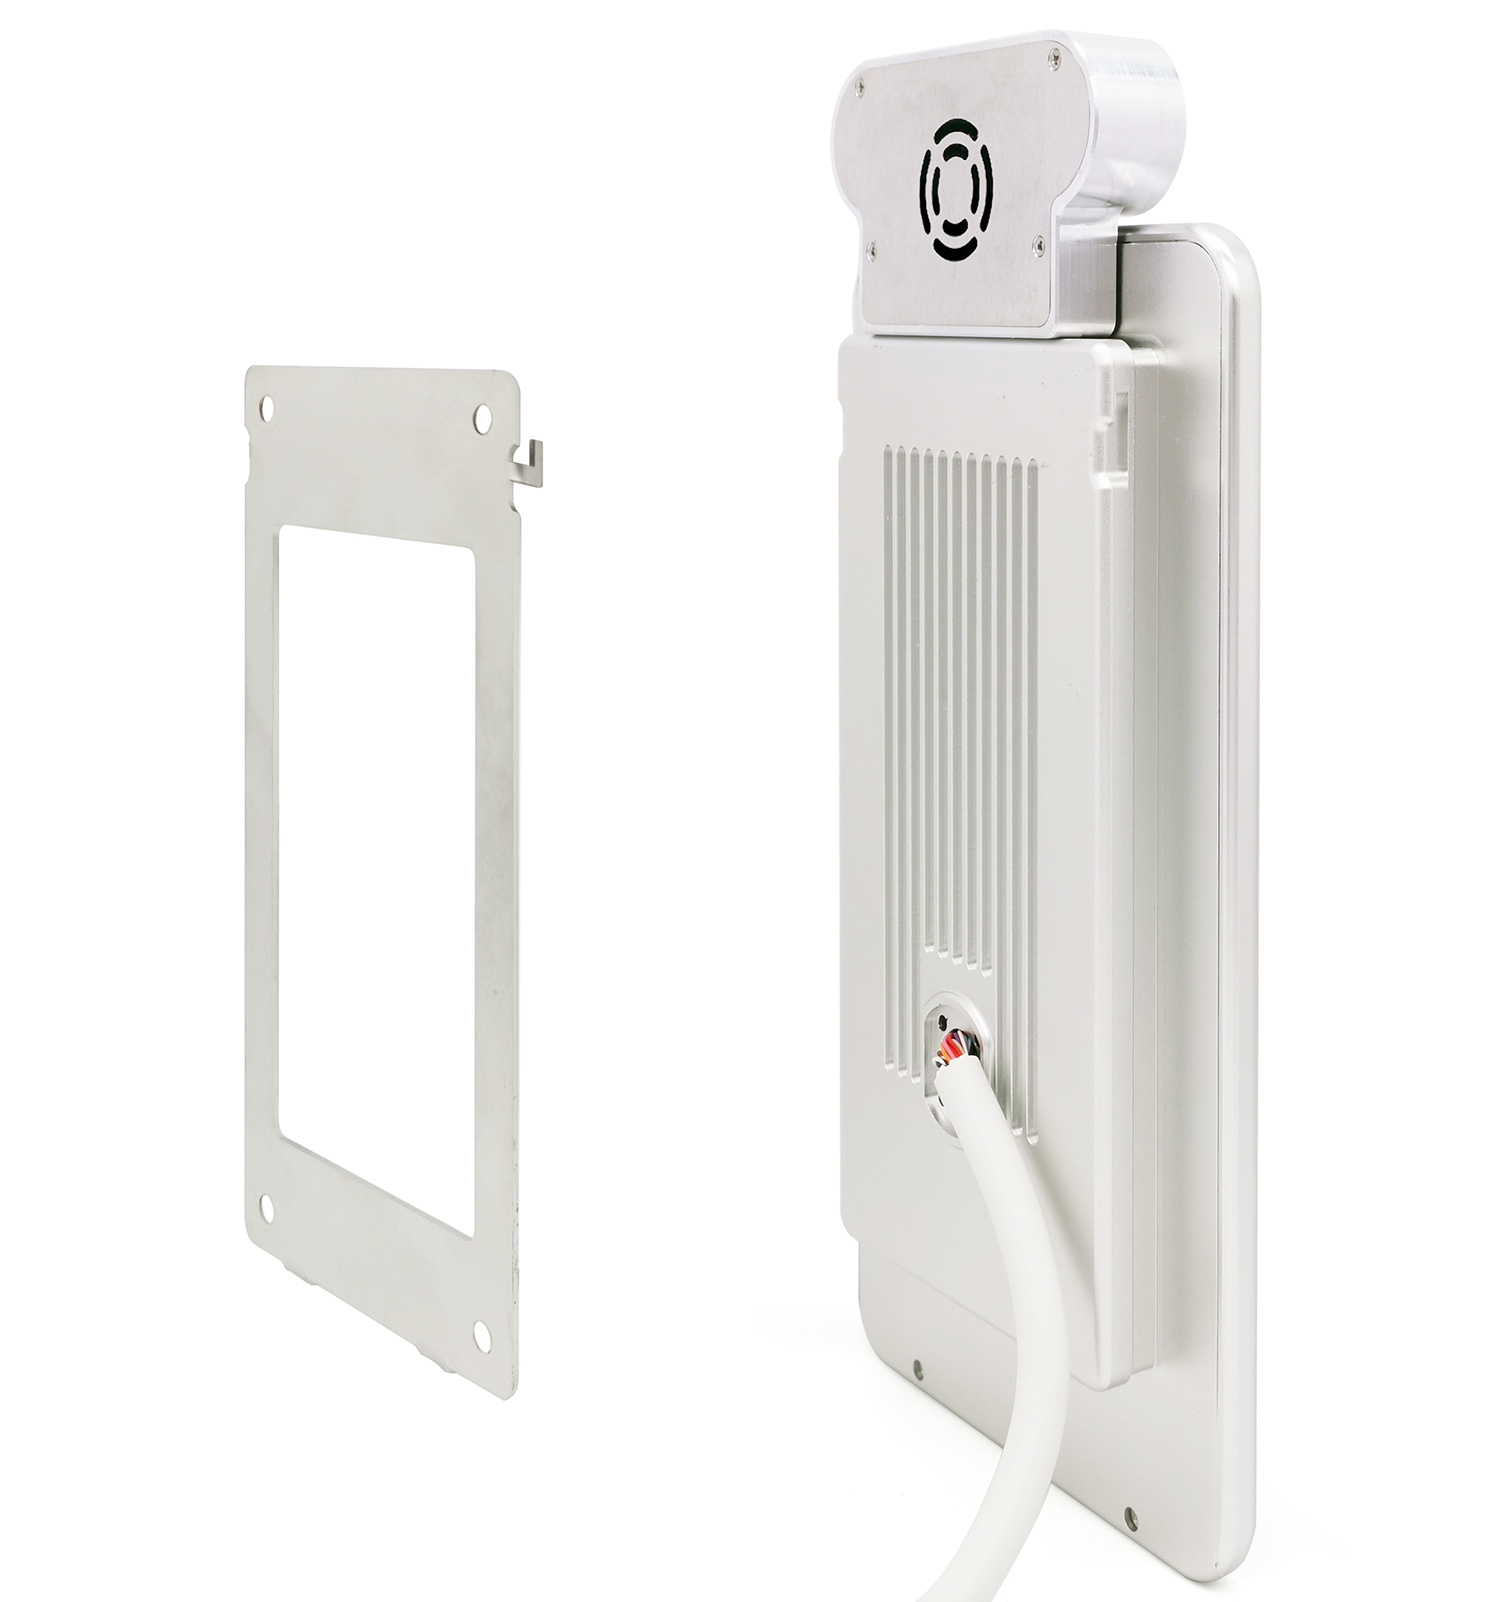 Wall Mounted Type Face Recognition Device with Boby Temperature Detection (5)